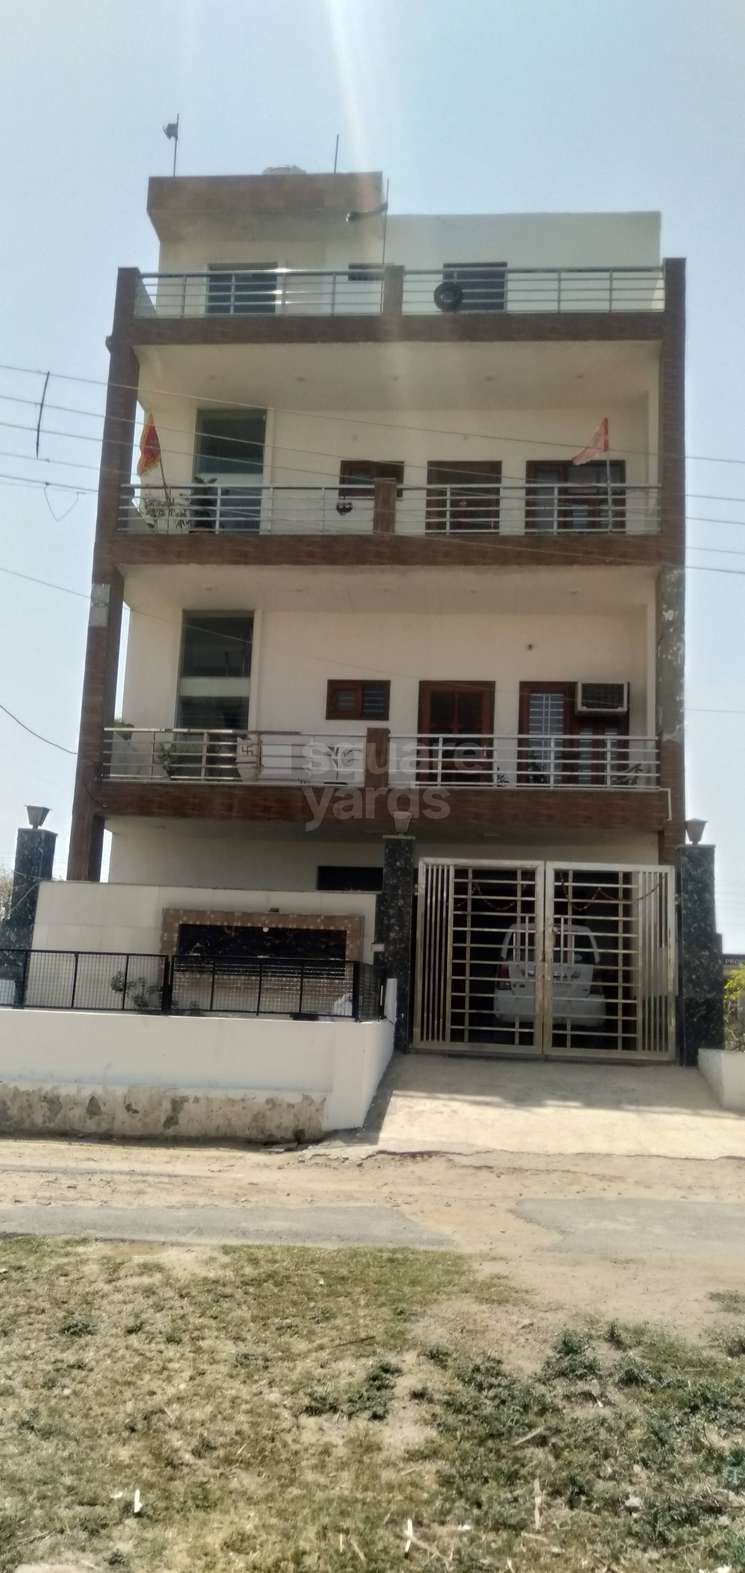 5 Bedroom 160 Sq.Ft. Independent House in Sector 62 Faridabad